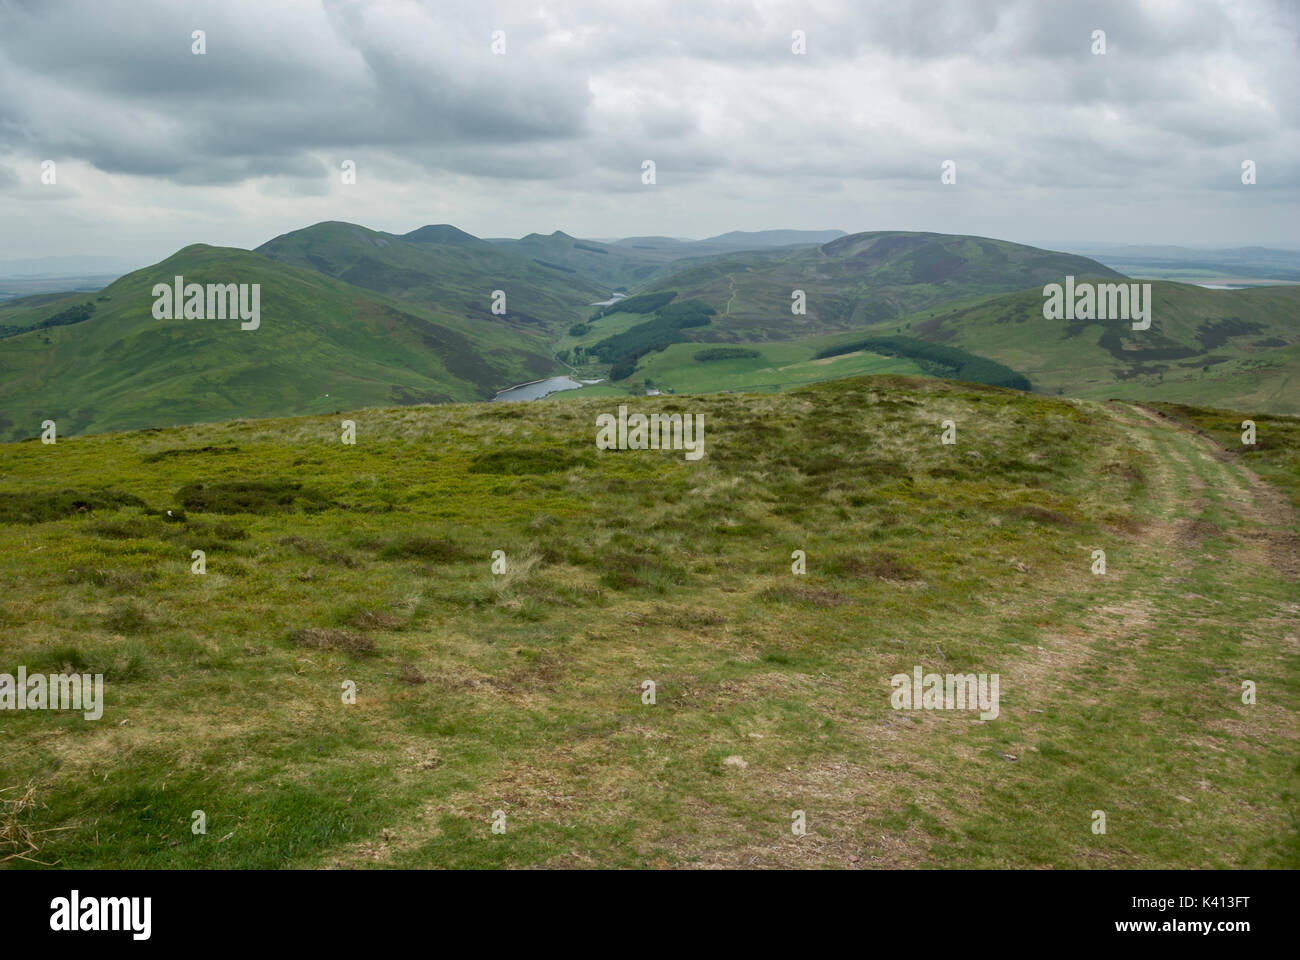 Castlelaw Hill, Turnhouse Hill, Carnethy Hill and Scald Law from Allermuir Hill, Pentland Hills, in The Pentland Hills Region Stock Photo